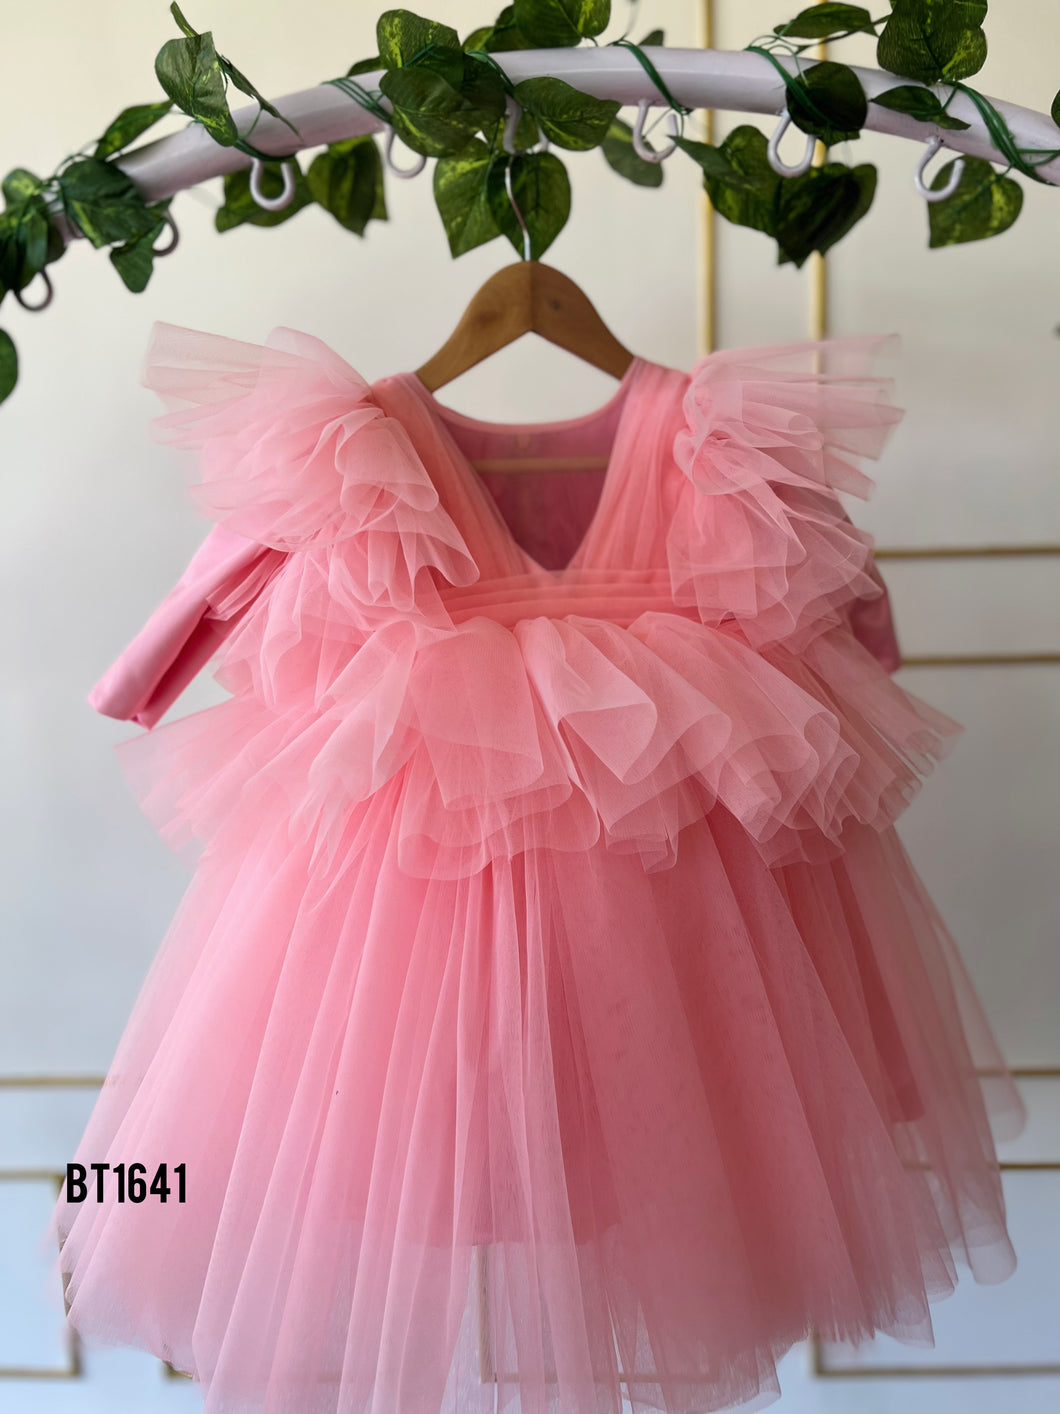 BT1641 Enchanted Pink Ruffle Gala Dress for Little Charms